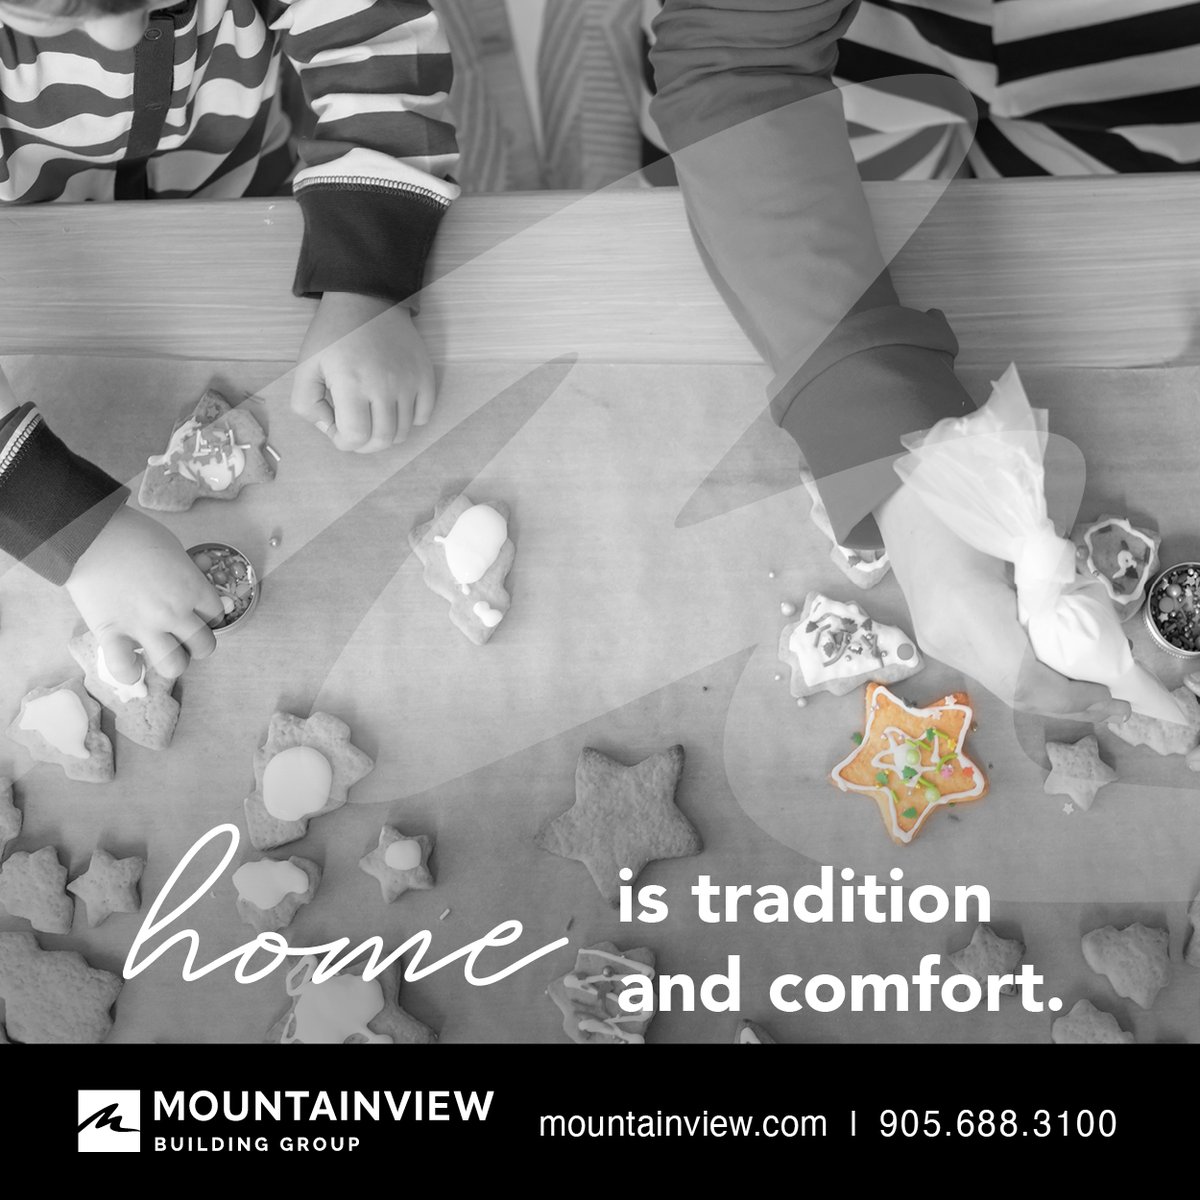 Home is tradition and comfort. Thank you for allowing us to be part of your journey.

#home #loveyourhome #homeowners #homeownership #family #buildwithus #niagara #niagararegion #niagarahomebuilder #niagarabuilder  #homebuilder #MountainviewBuildingGroup #MountainviewHomes